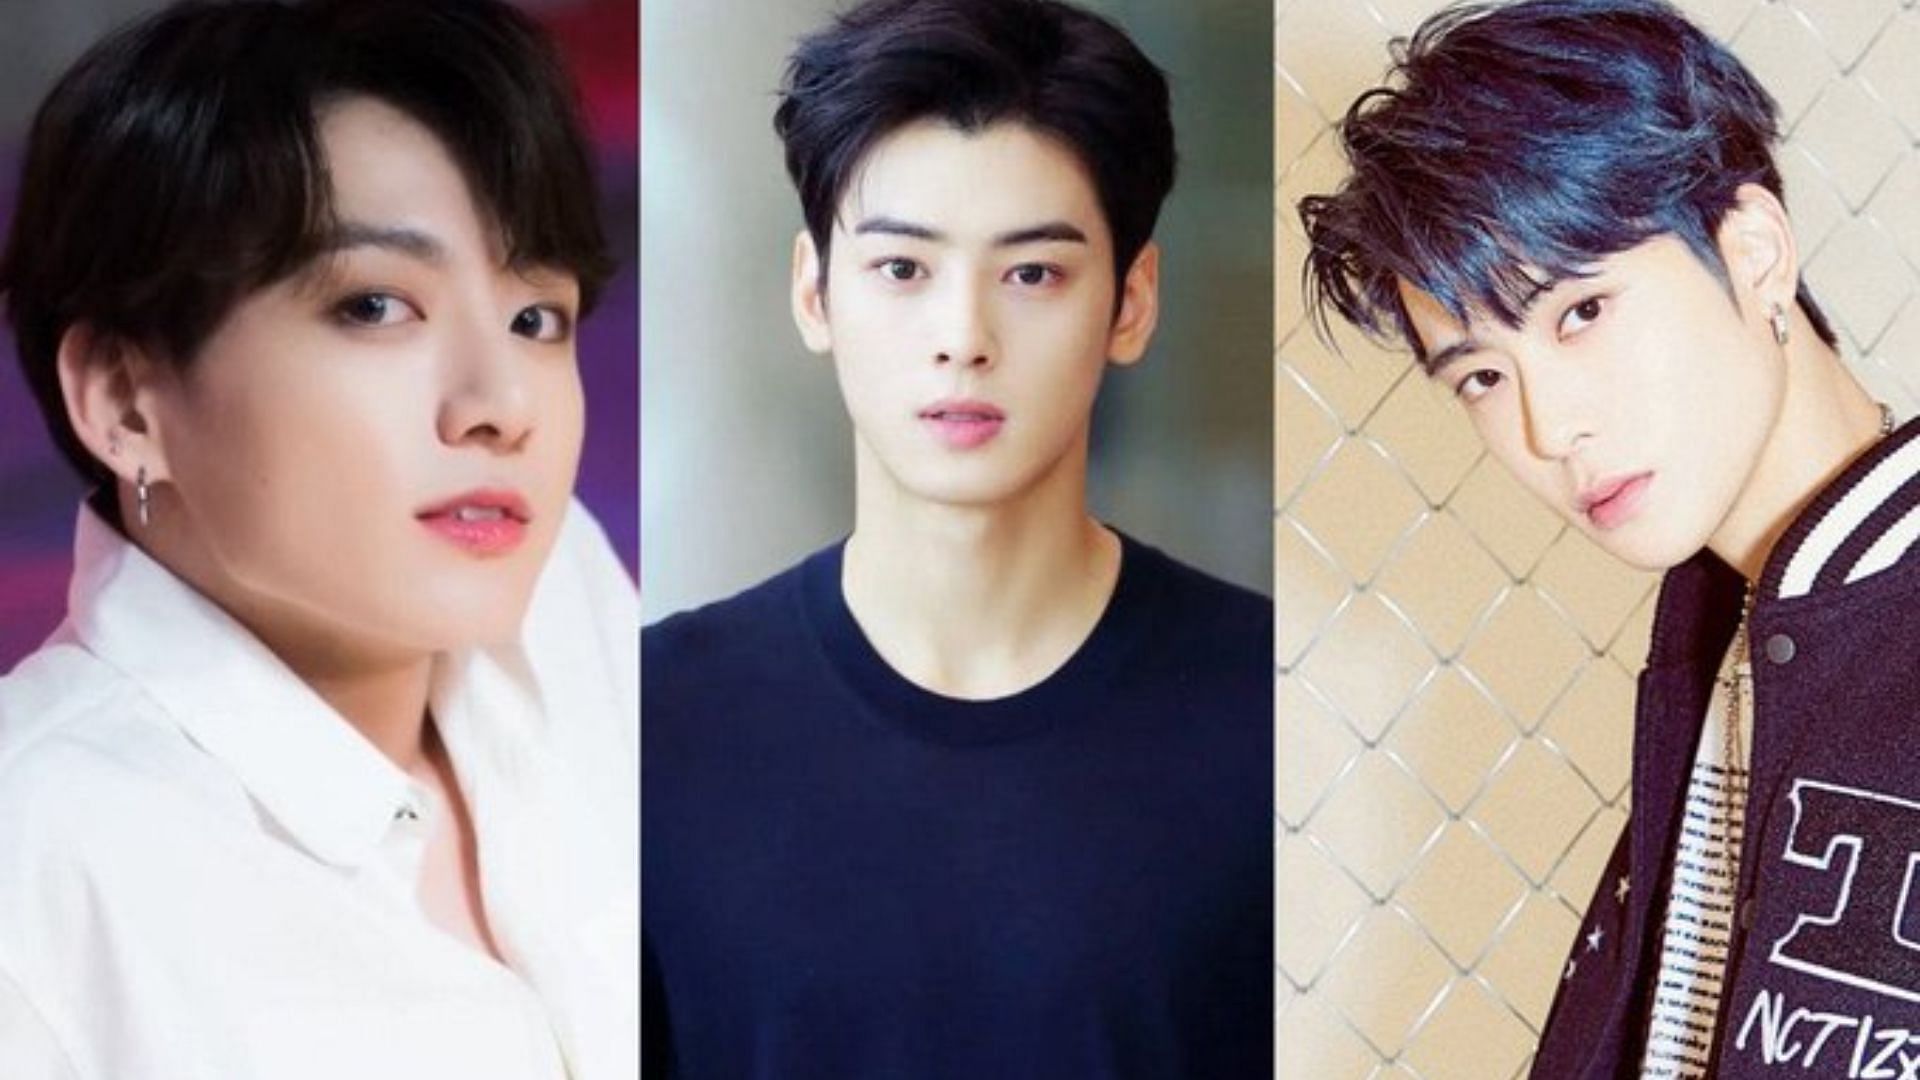 BTS' Jungkook, ASTRO's Cha Eun Woo & NCT's Jaehyun's Fan, Who Approached  The Three Idols For Autograph, Pleads “We're Not Stalkers” Amid Backlash